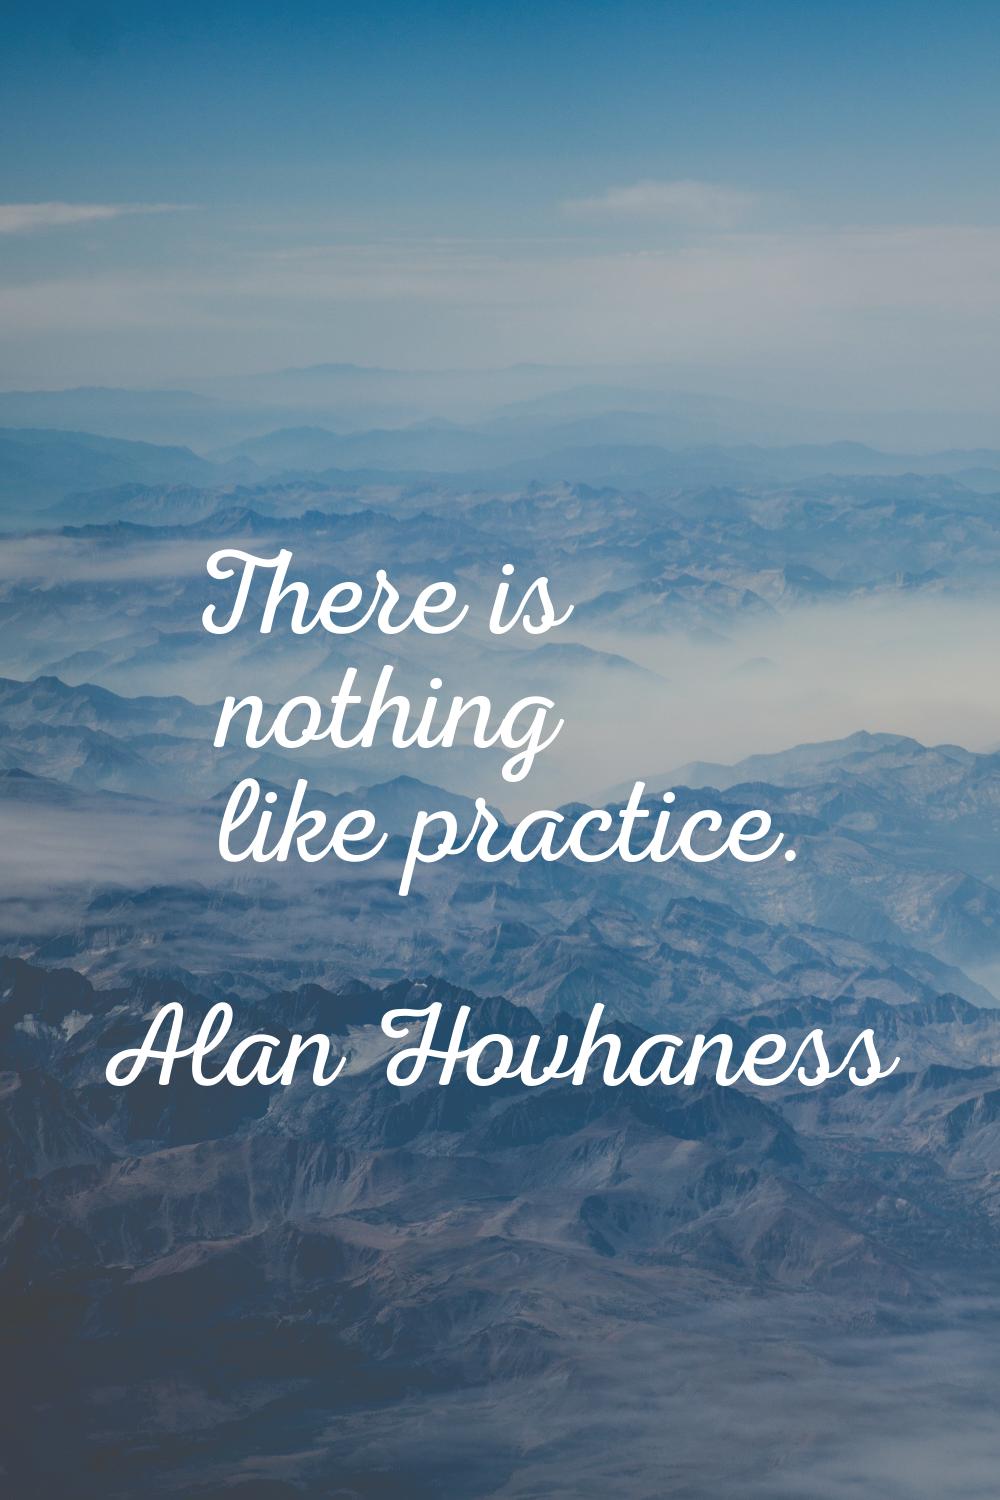 There is nothing like practice.